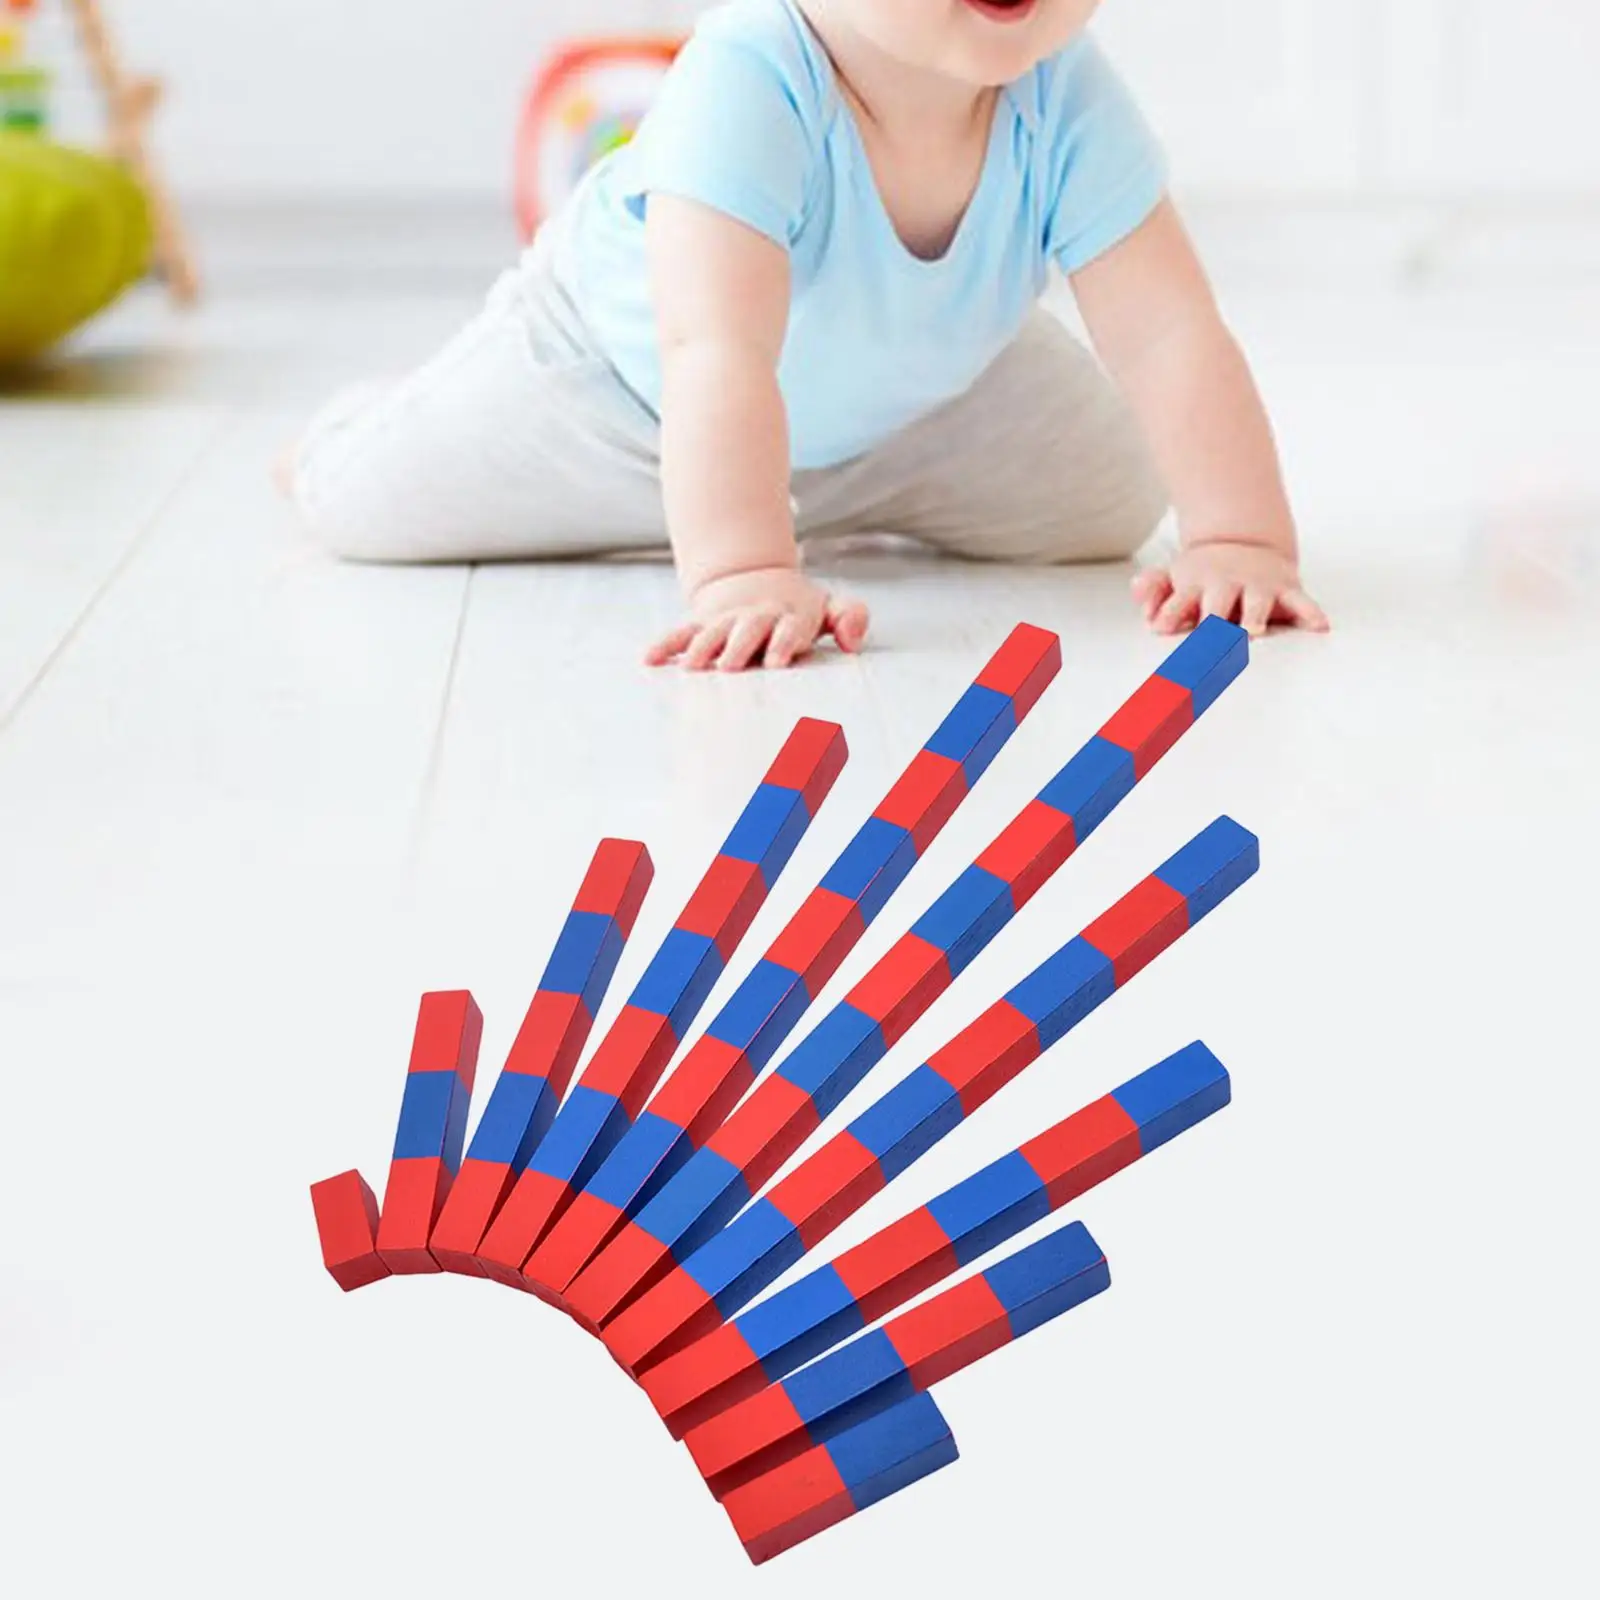 Wood Montessori Red Blue Number Rods Counting Sticks Practical Number Match Puzzle Cognition Mathematic Aid for Daycare Holiday